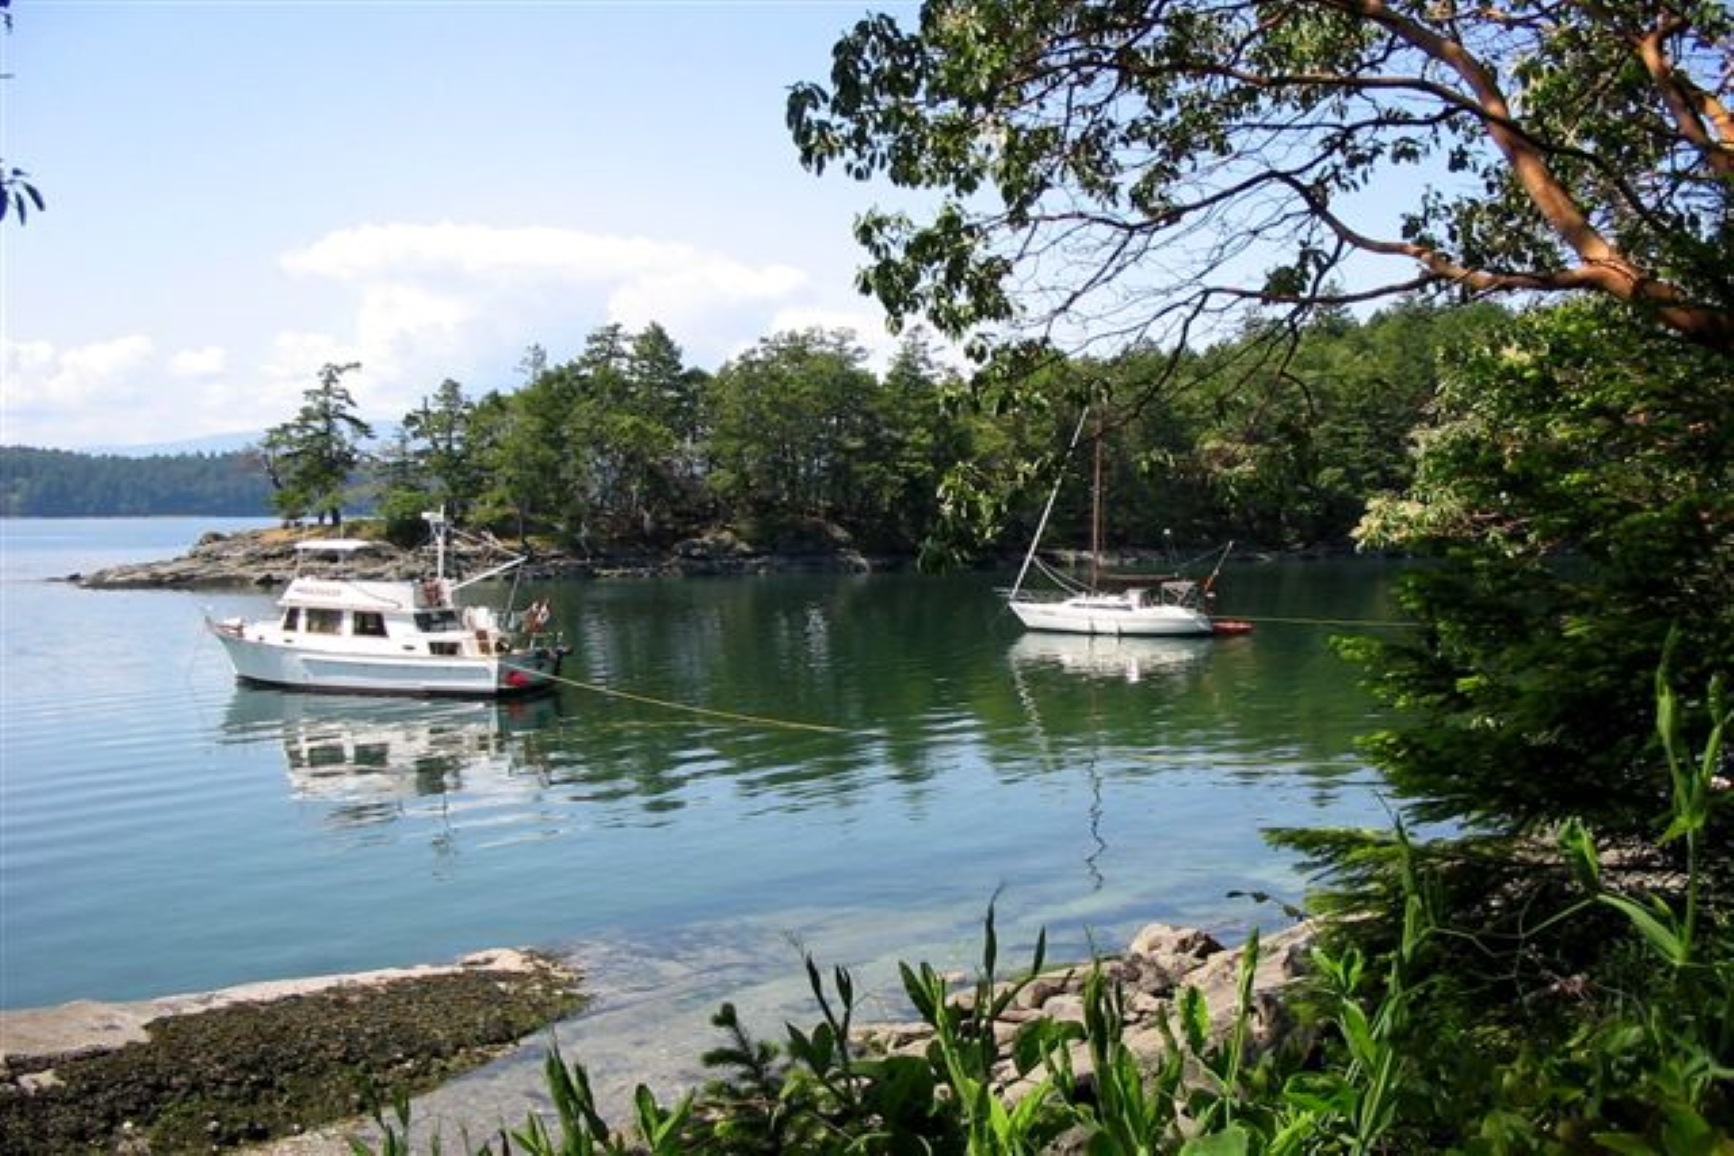 The lake shore with two boats docked nearby.